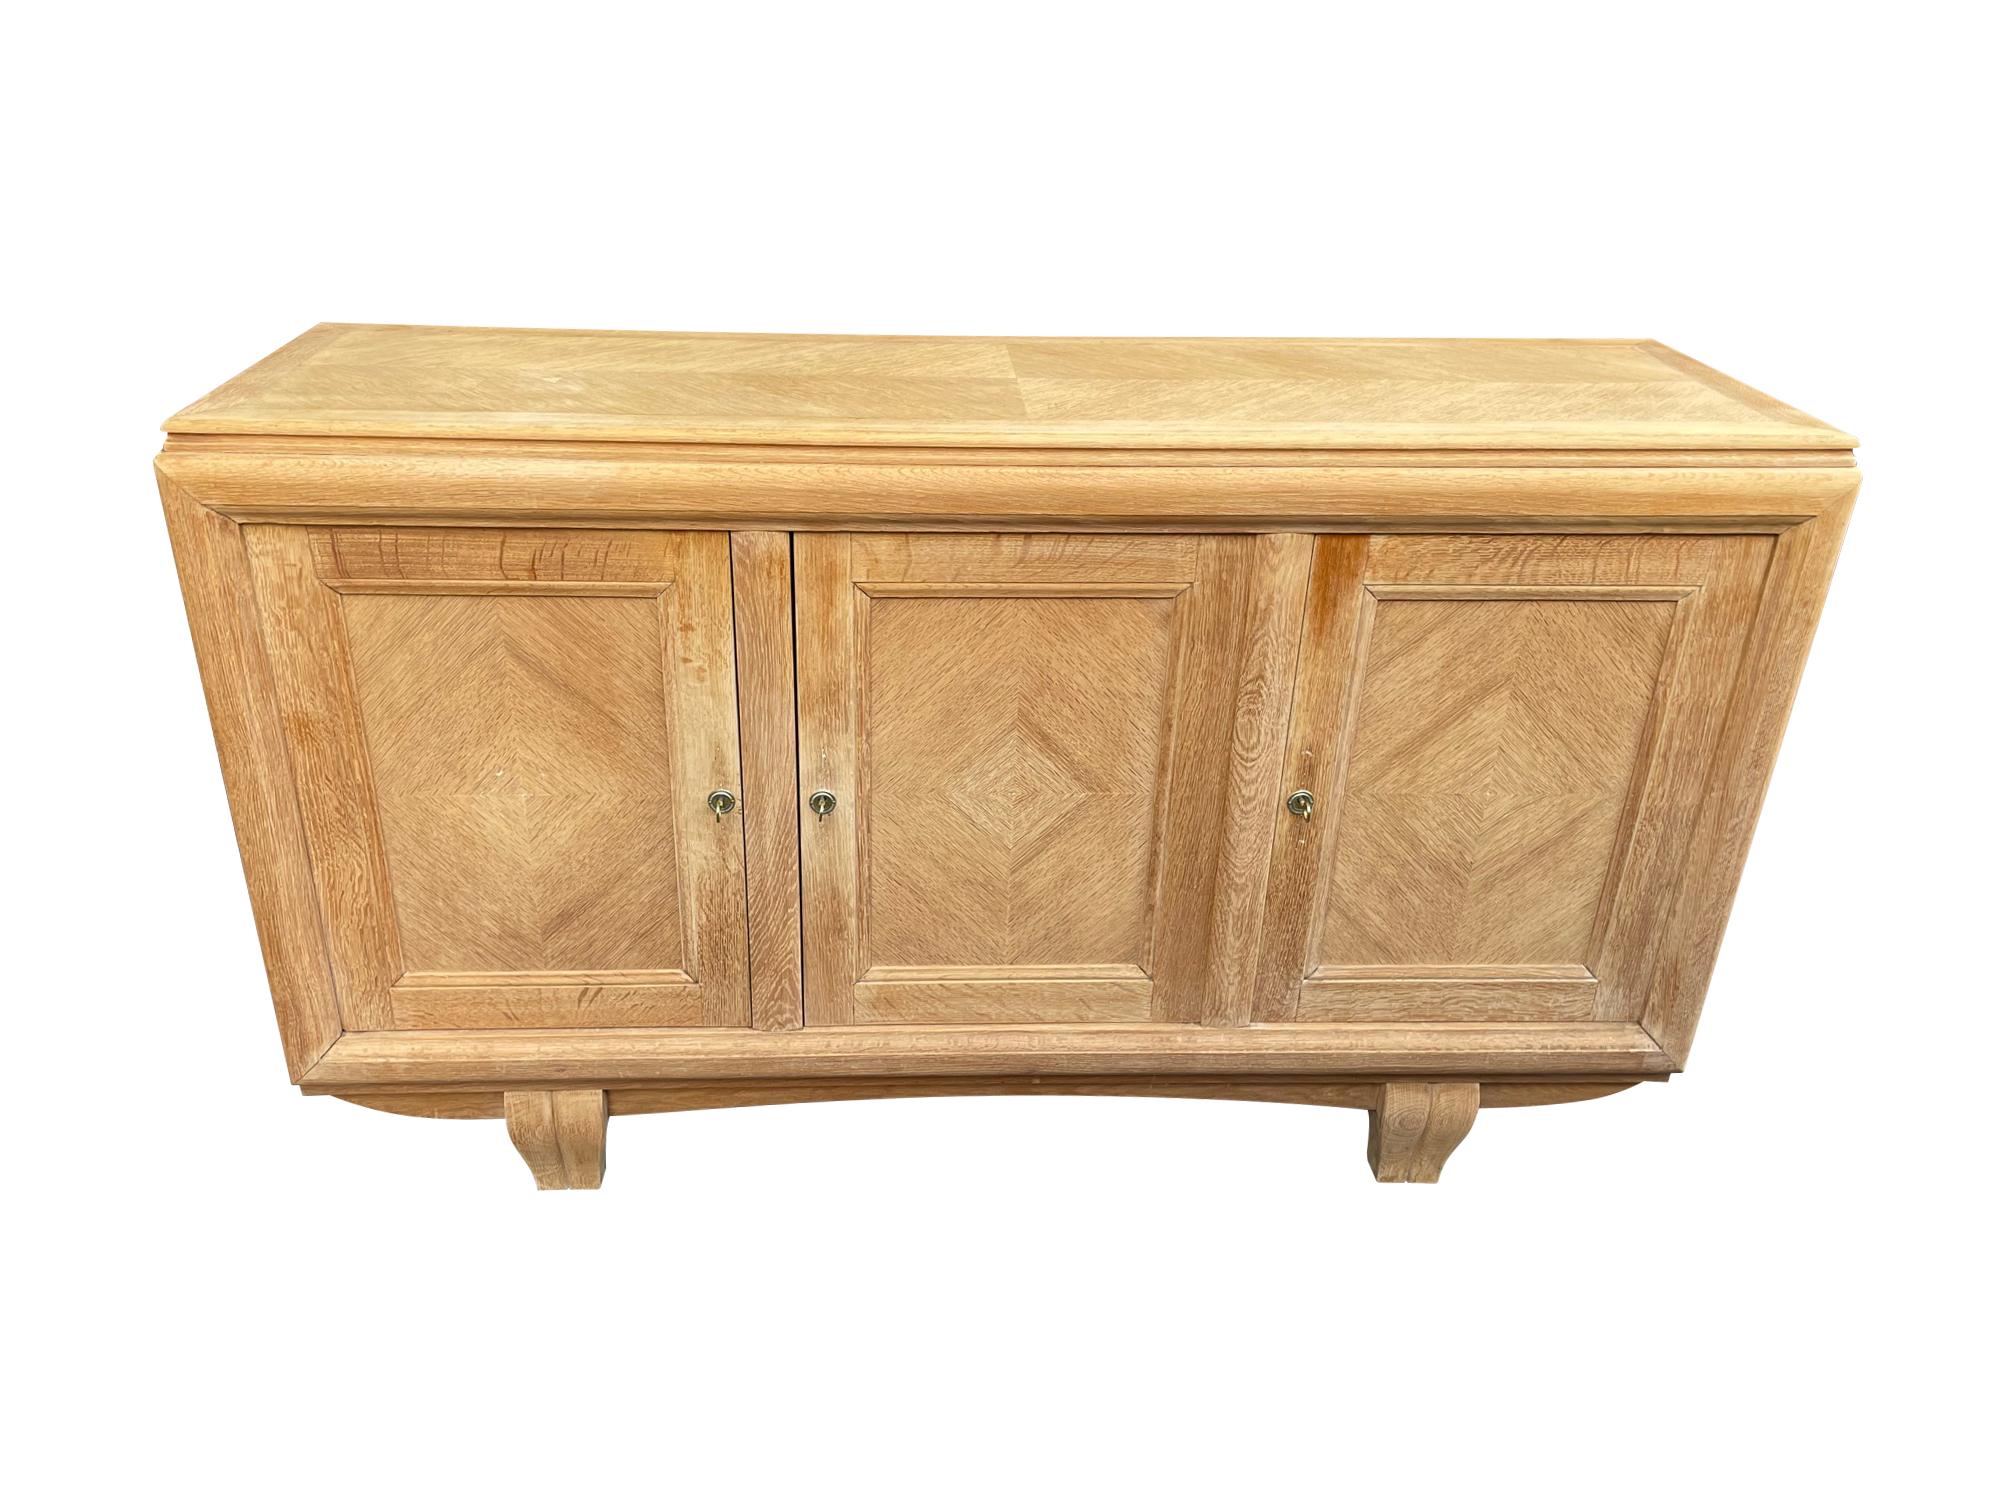 A quality 1940s natural oak three door sideboard by Gaston Poisson with wonderful diamond pattern detail doors, solid curved oak front feet and solid oak top with chevron inlay detail. With three orignal brass and nickel keys with orignal circular